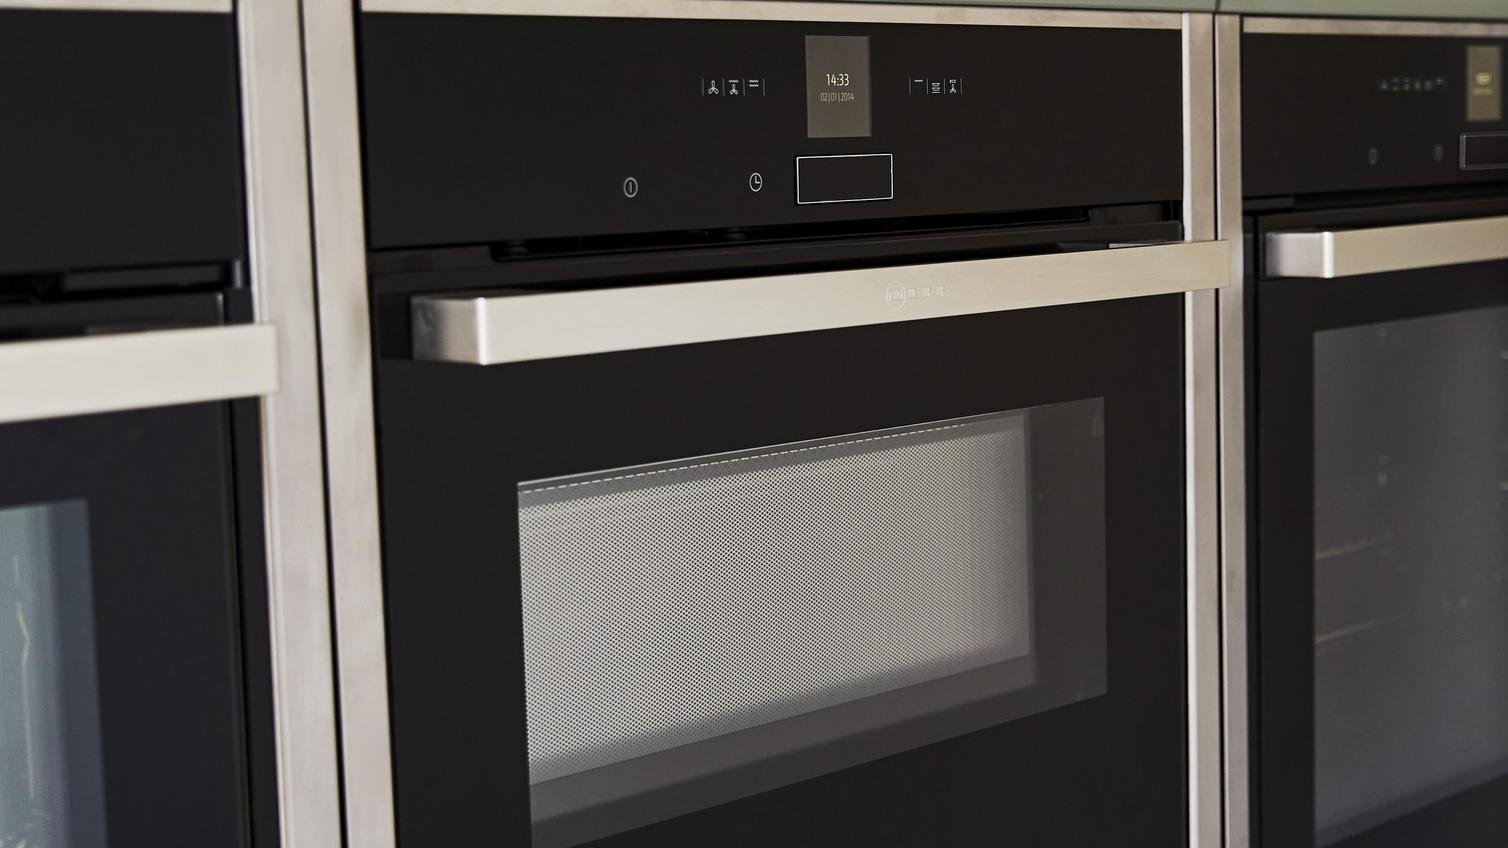 Close up image of built-in steam ovens, three in a row, on a tower unit with sage green shaker doors.